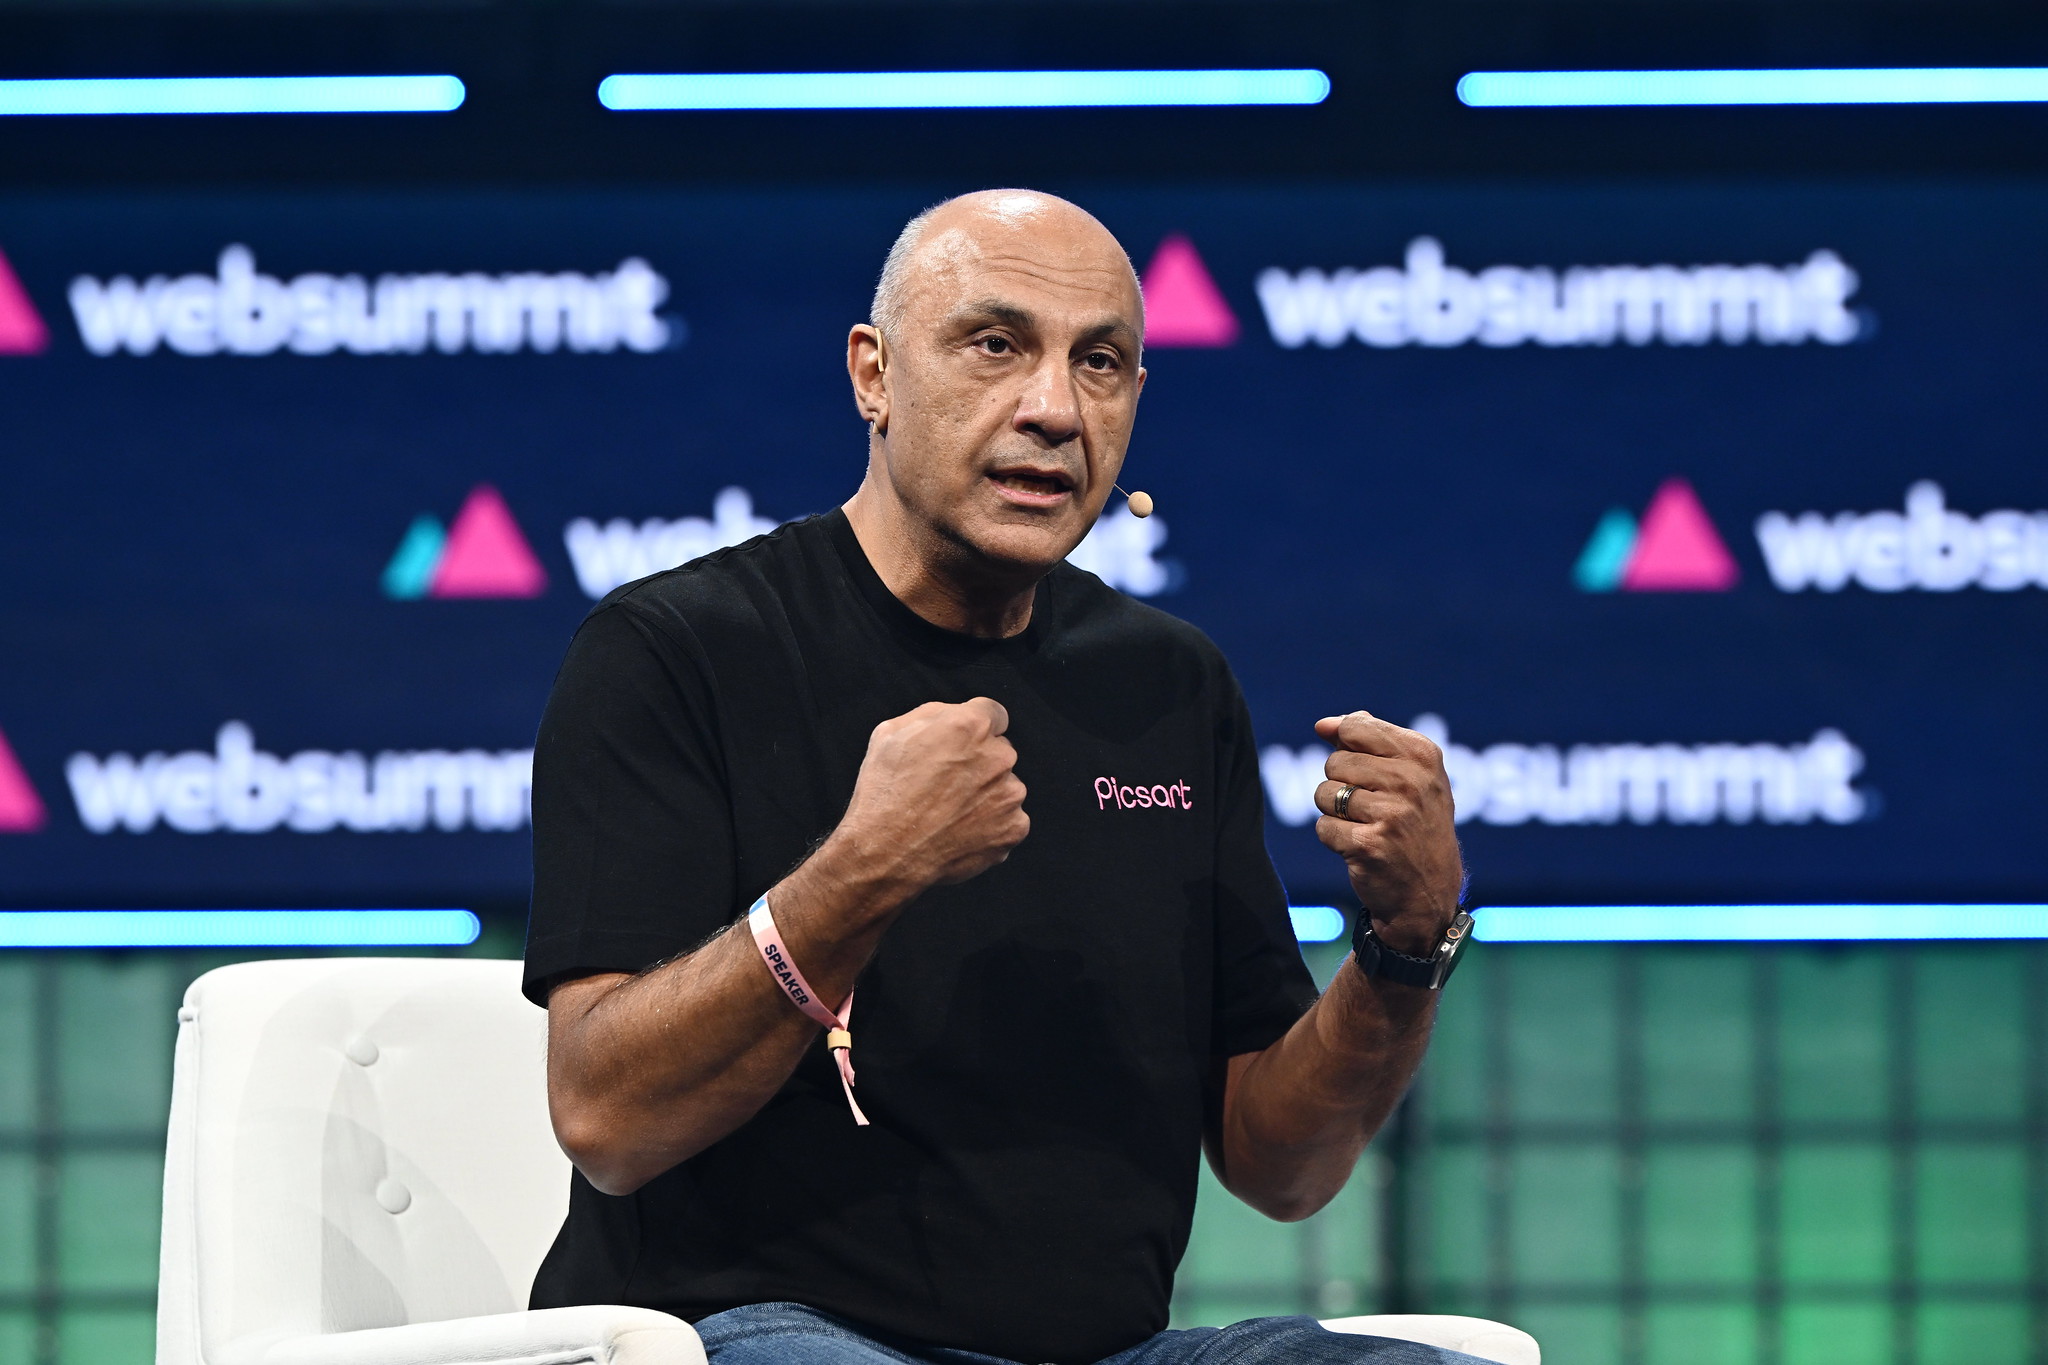 Photograph of a person (Hovhannes Avoyan, Founder and CEO of Picsart) speaking on stage at Web Summit. The person is sitting on a chair and gesturing with their hands.